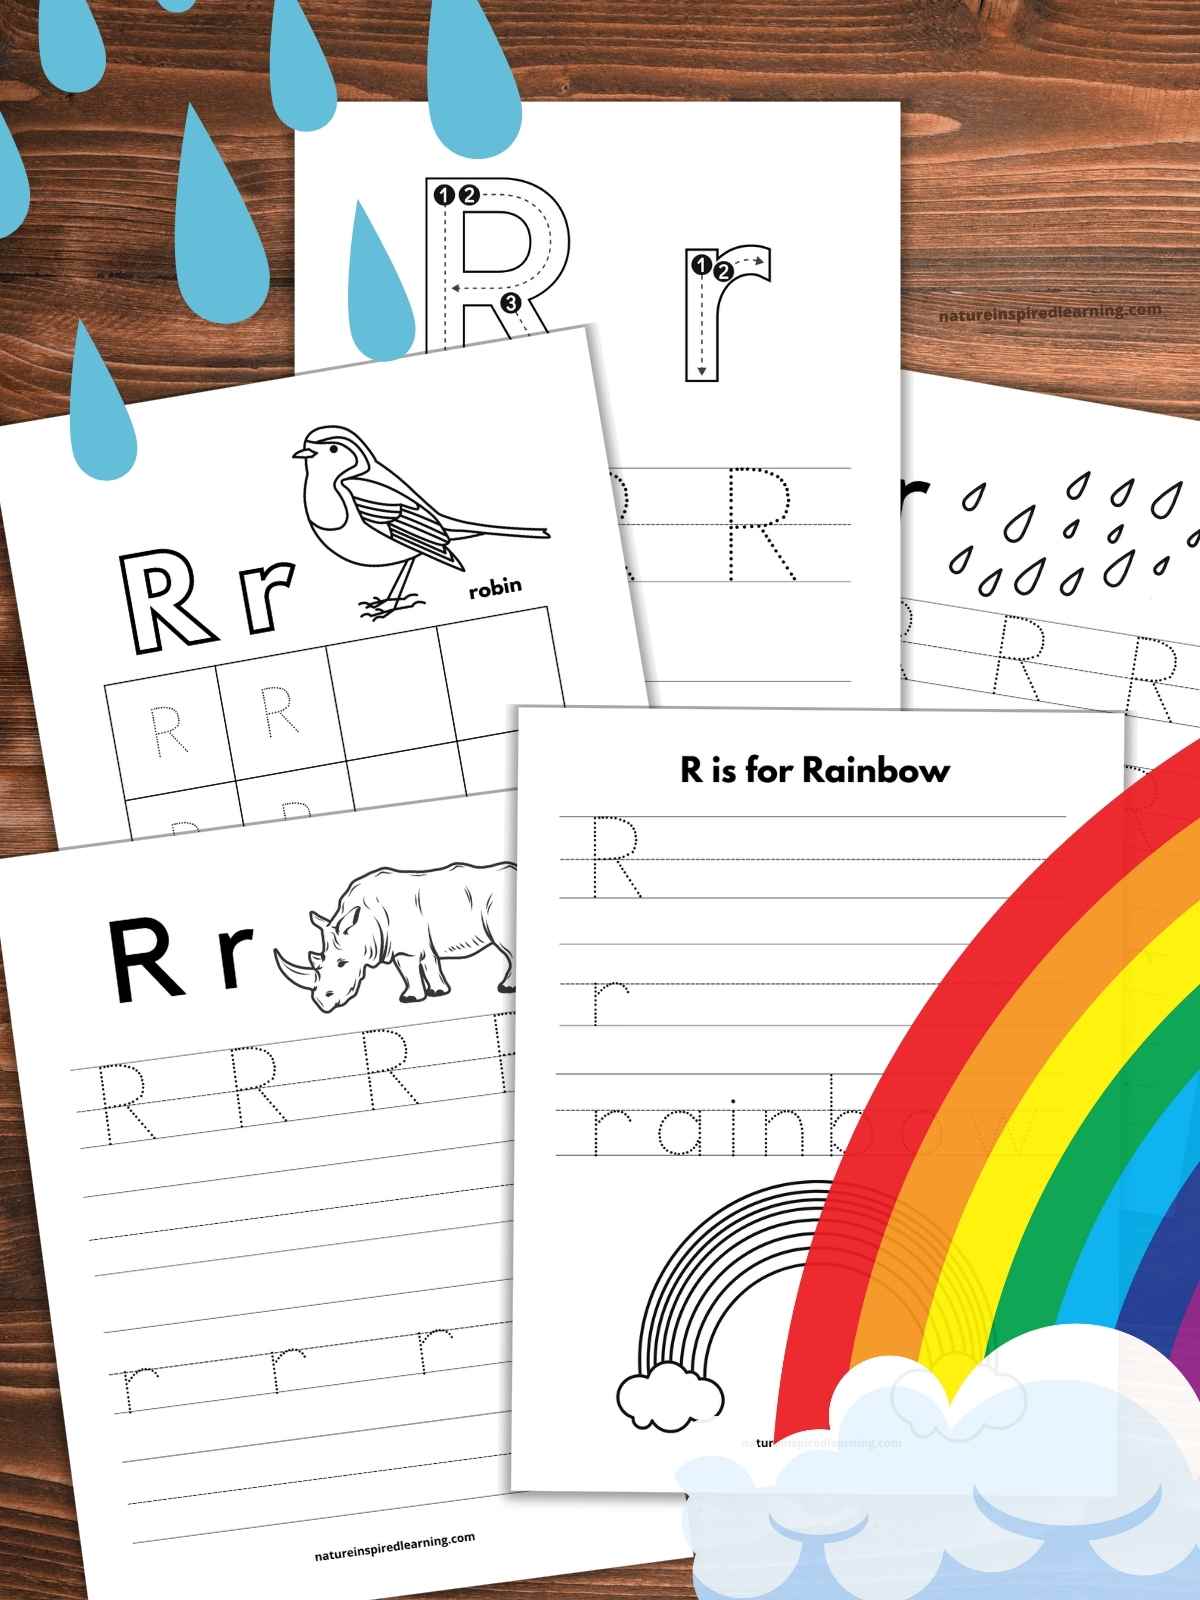 Five letter R tracing worksheets overlapping on a wooden background with blue raindrops upper left rainbow with cloud bottom right